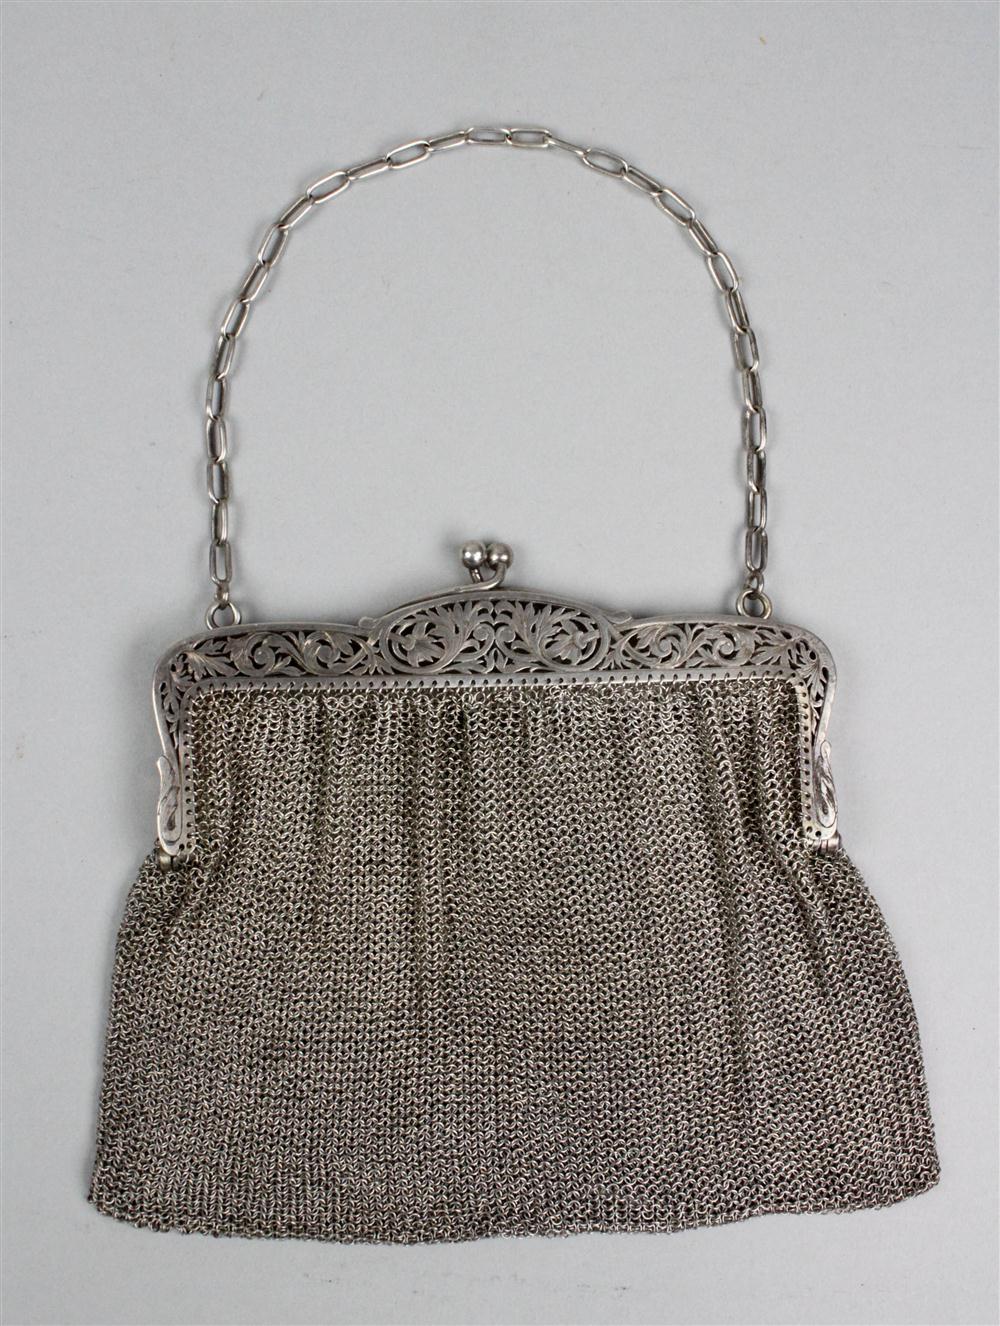 AMERICAN MESH EVENING BAG with